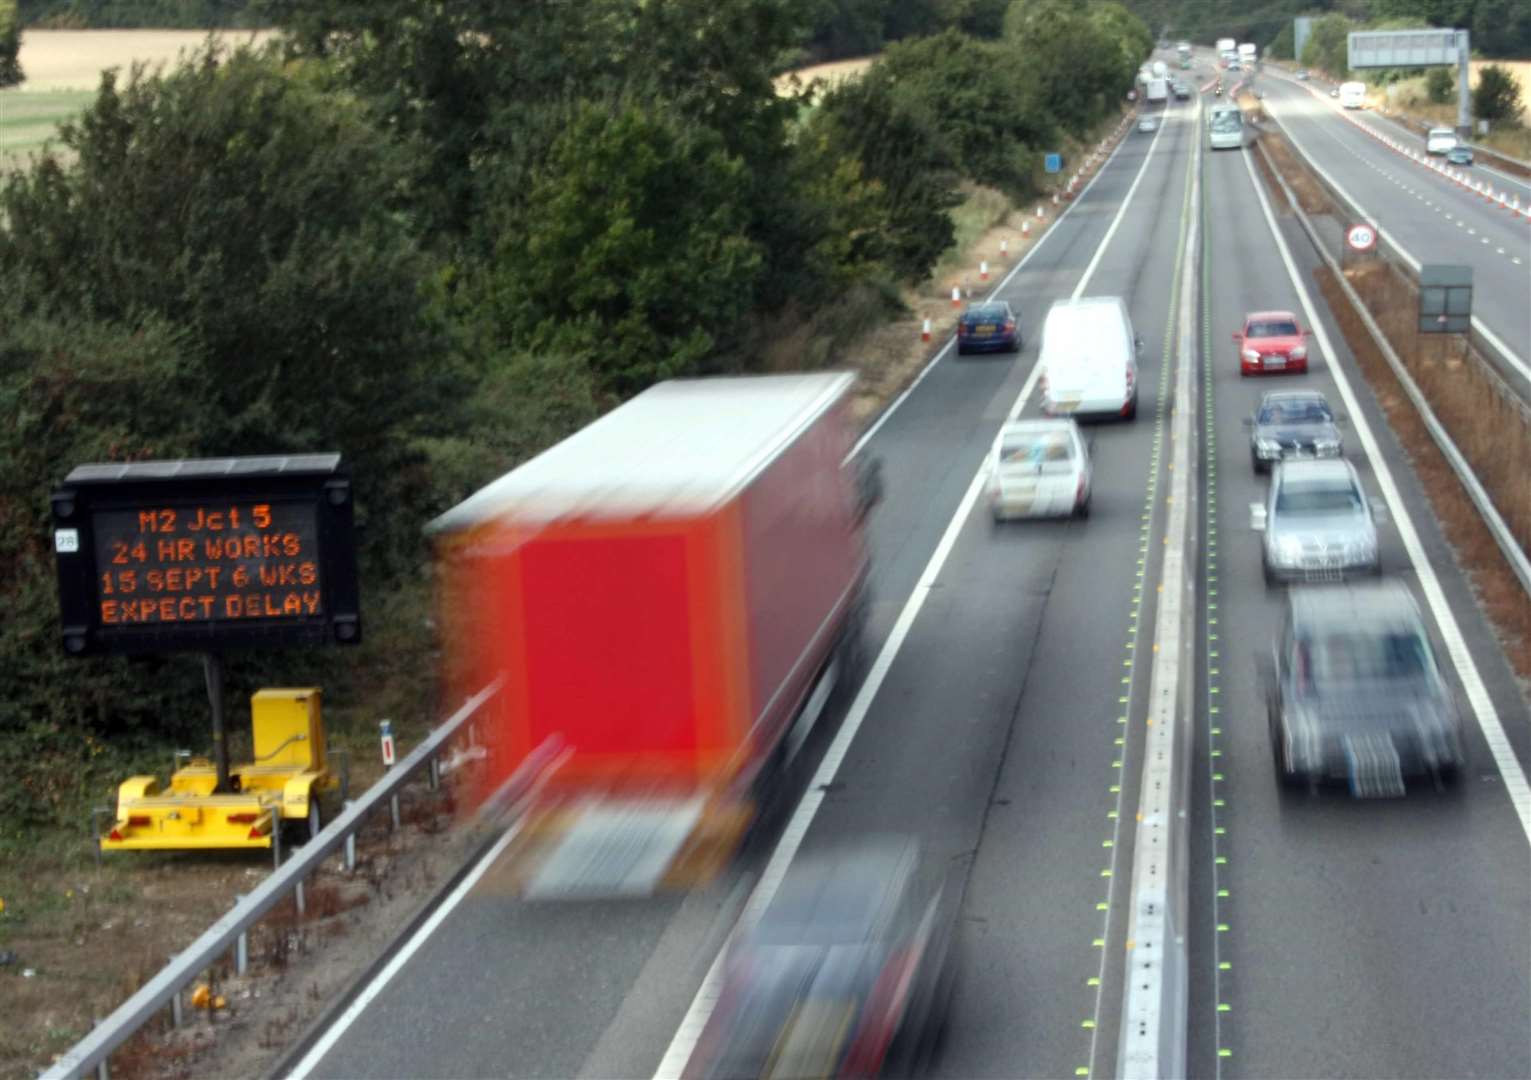 There are ongoing works on the M2